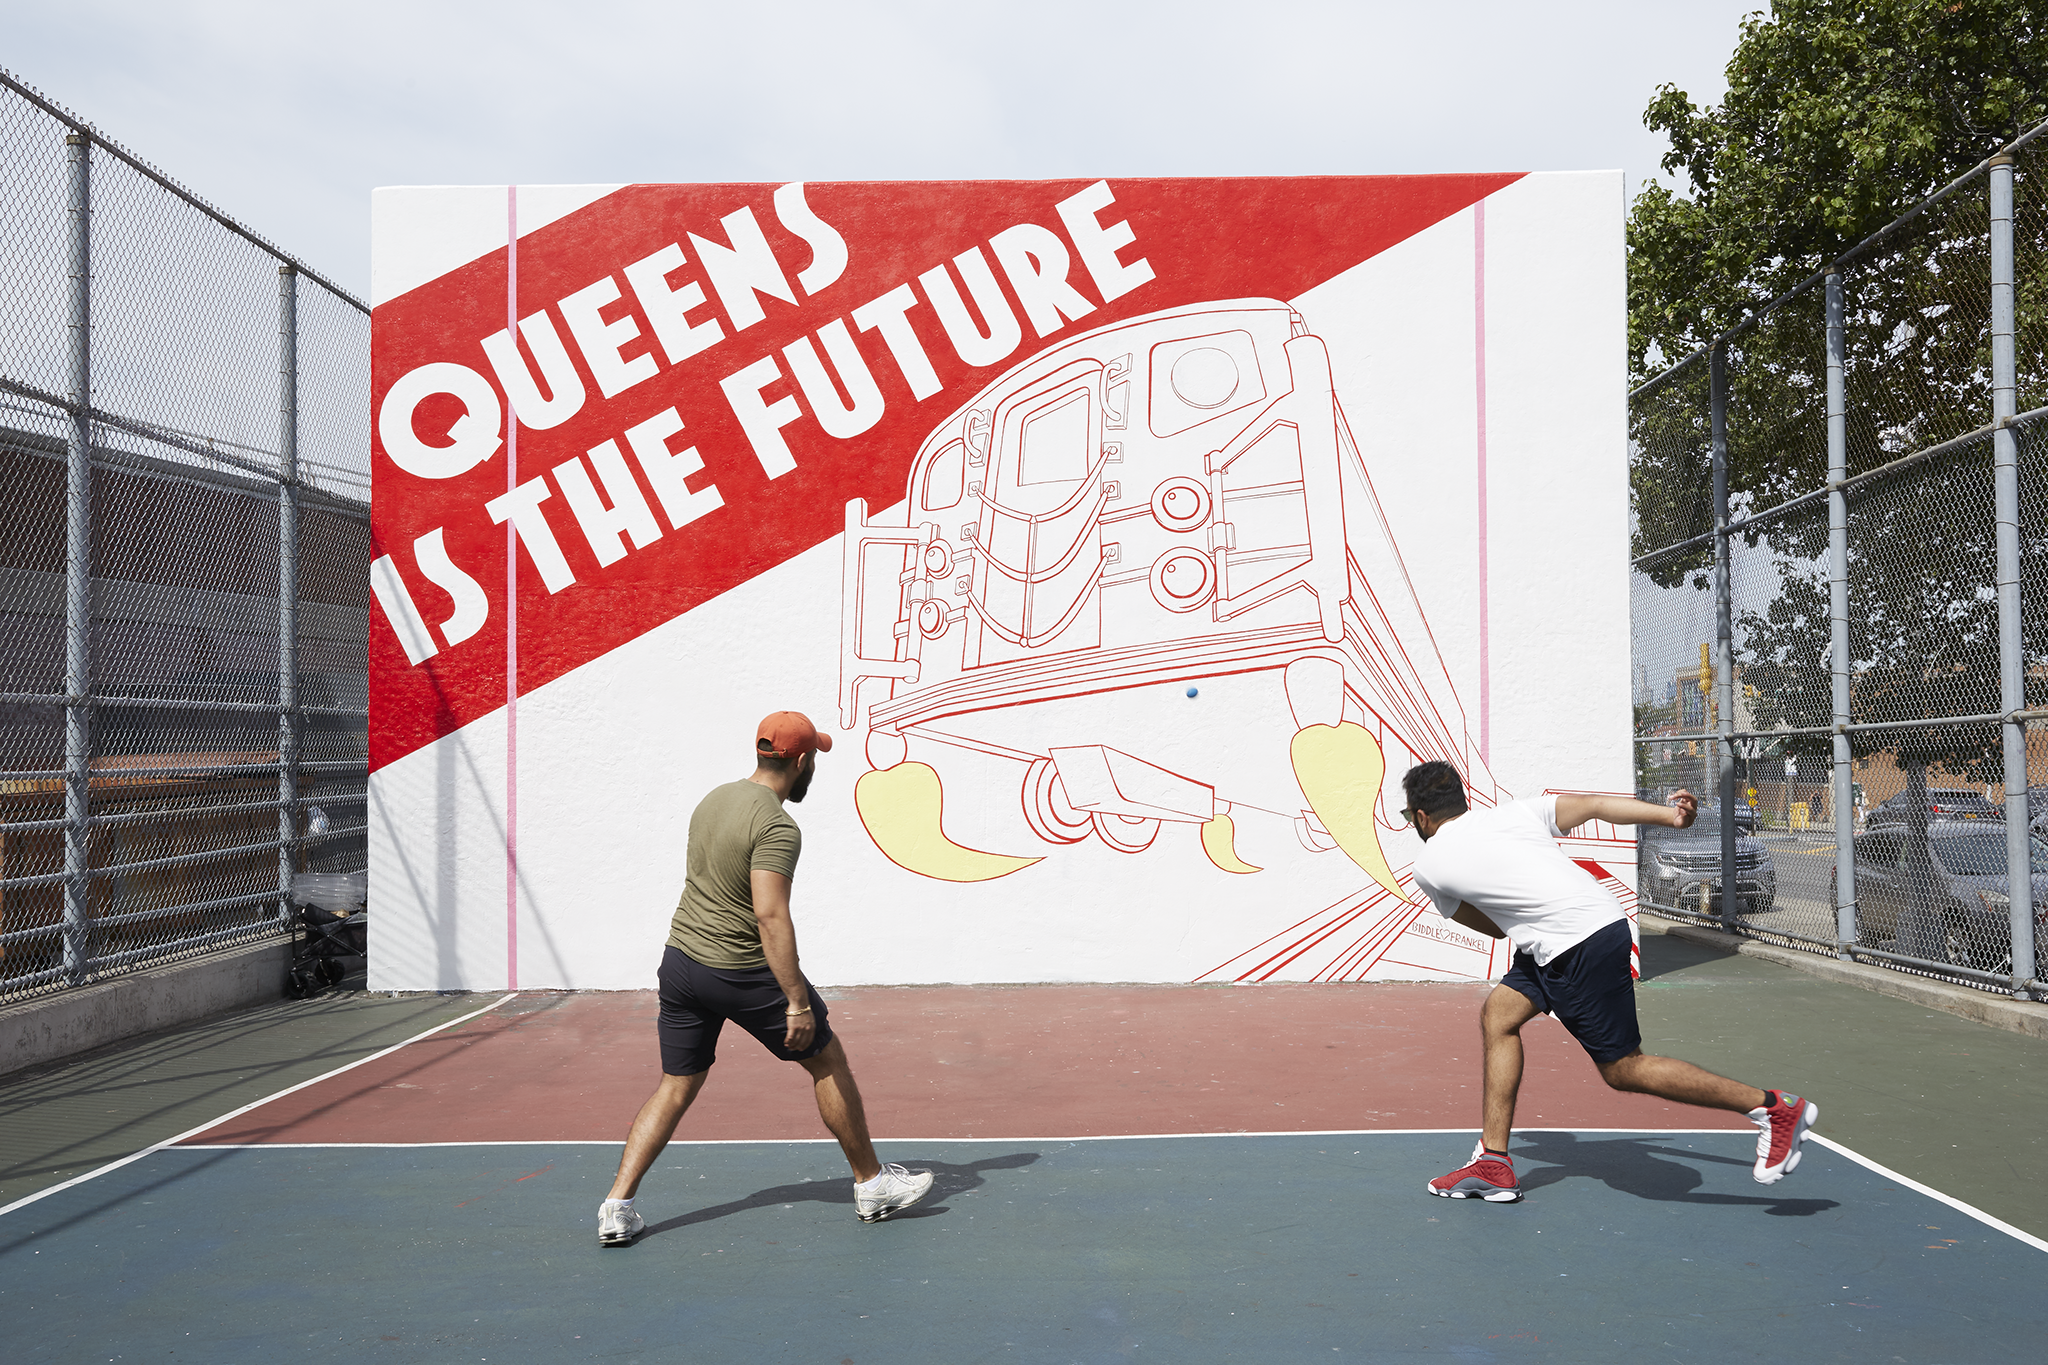 The QUEENS IS THE FUTURE mural after restoration. Two men playing handball.